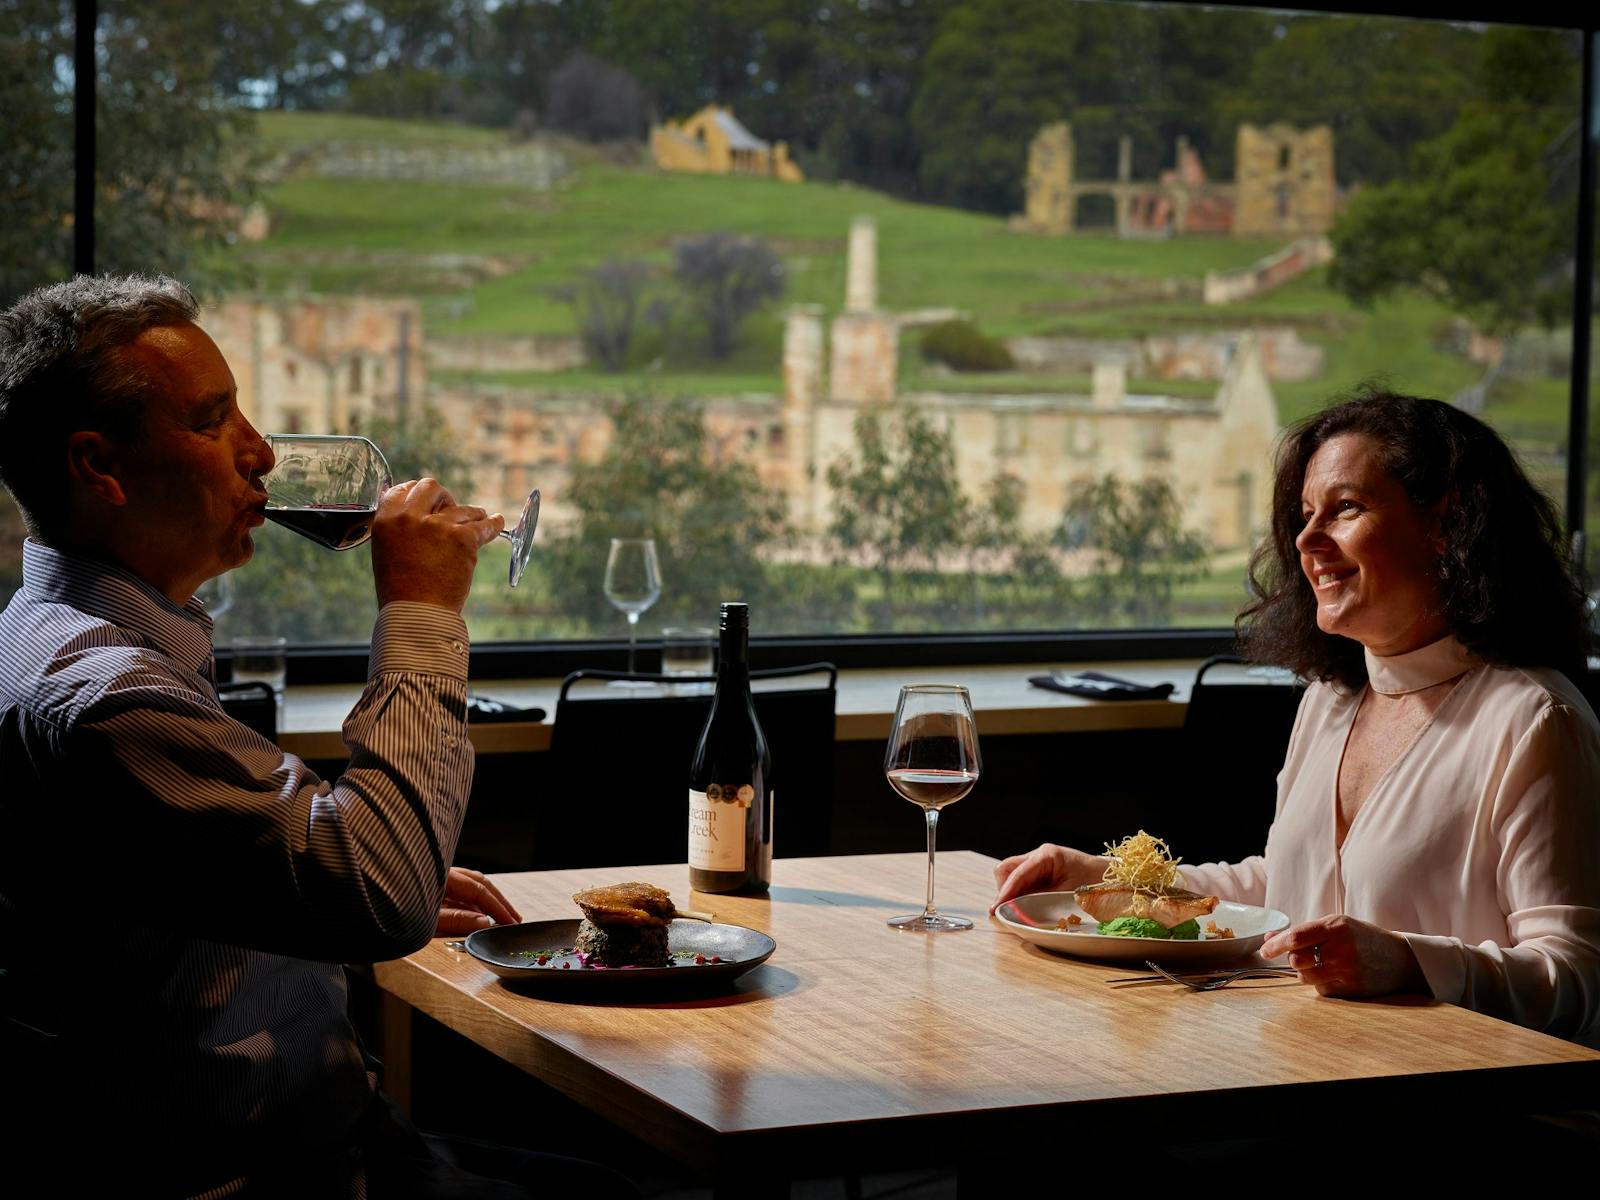 Enjoy your dinner with the iconic view of the Penitentiary